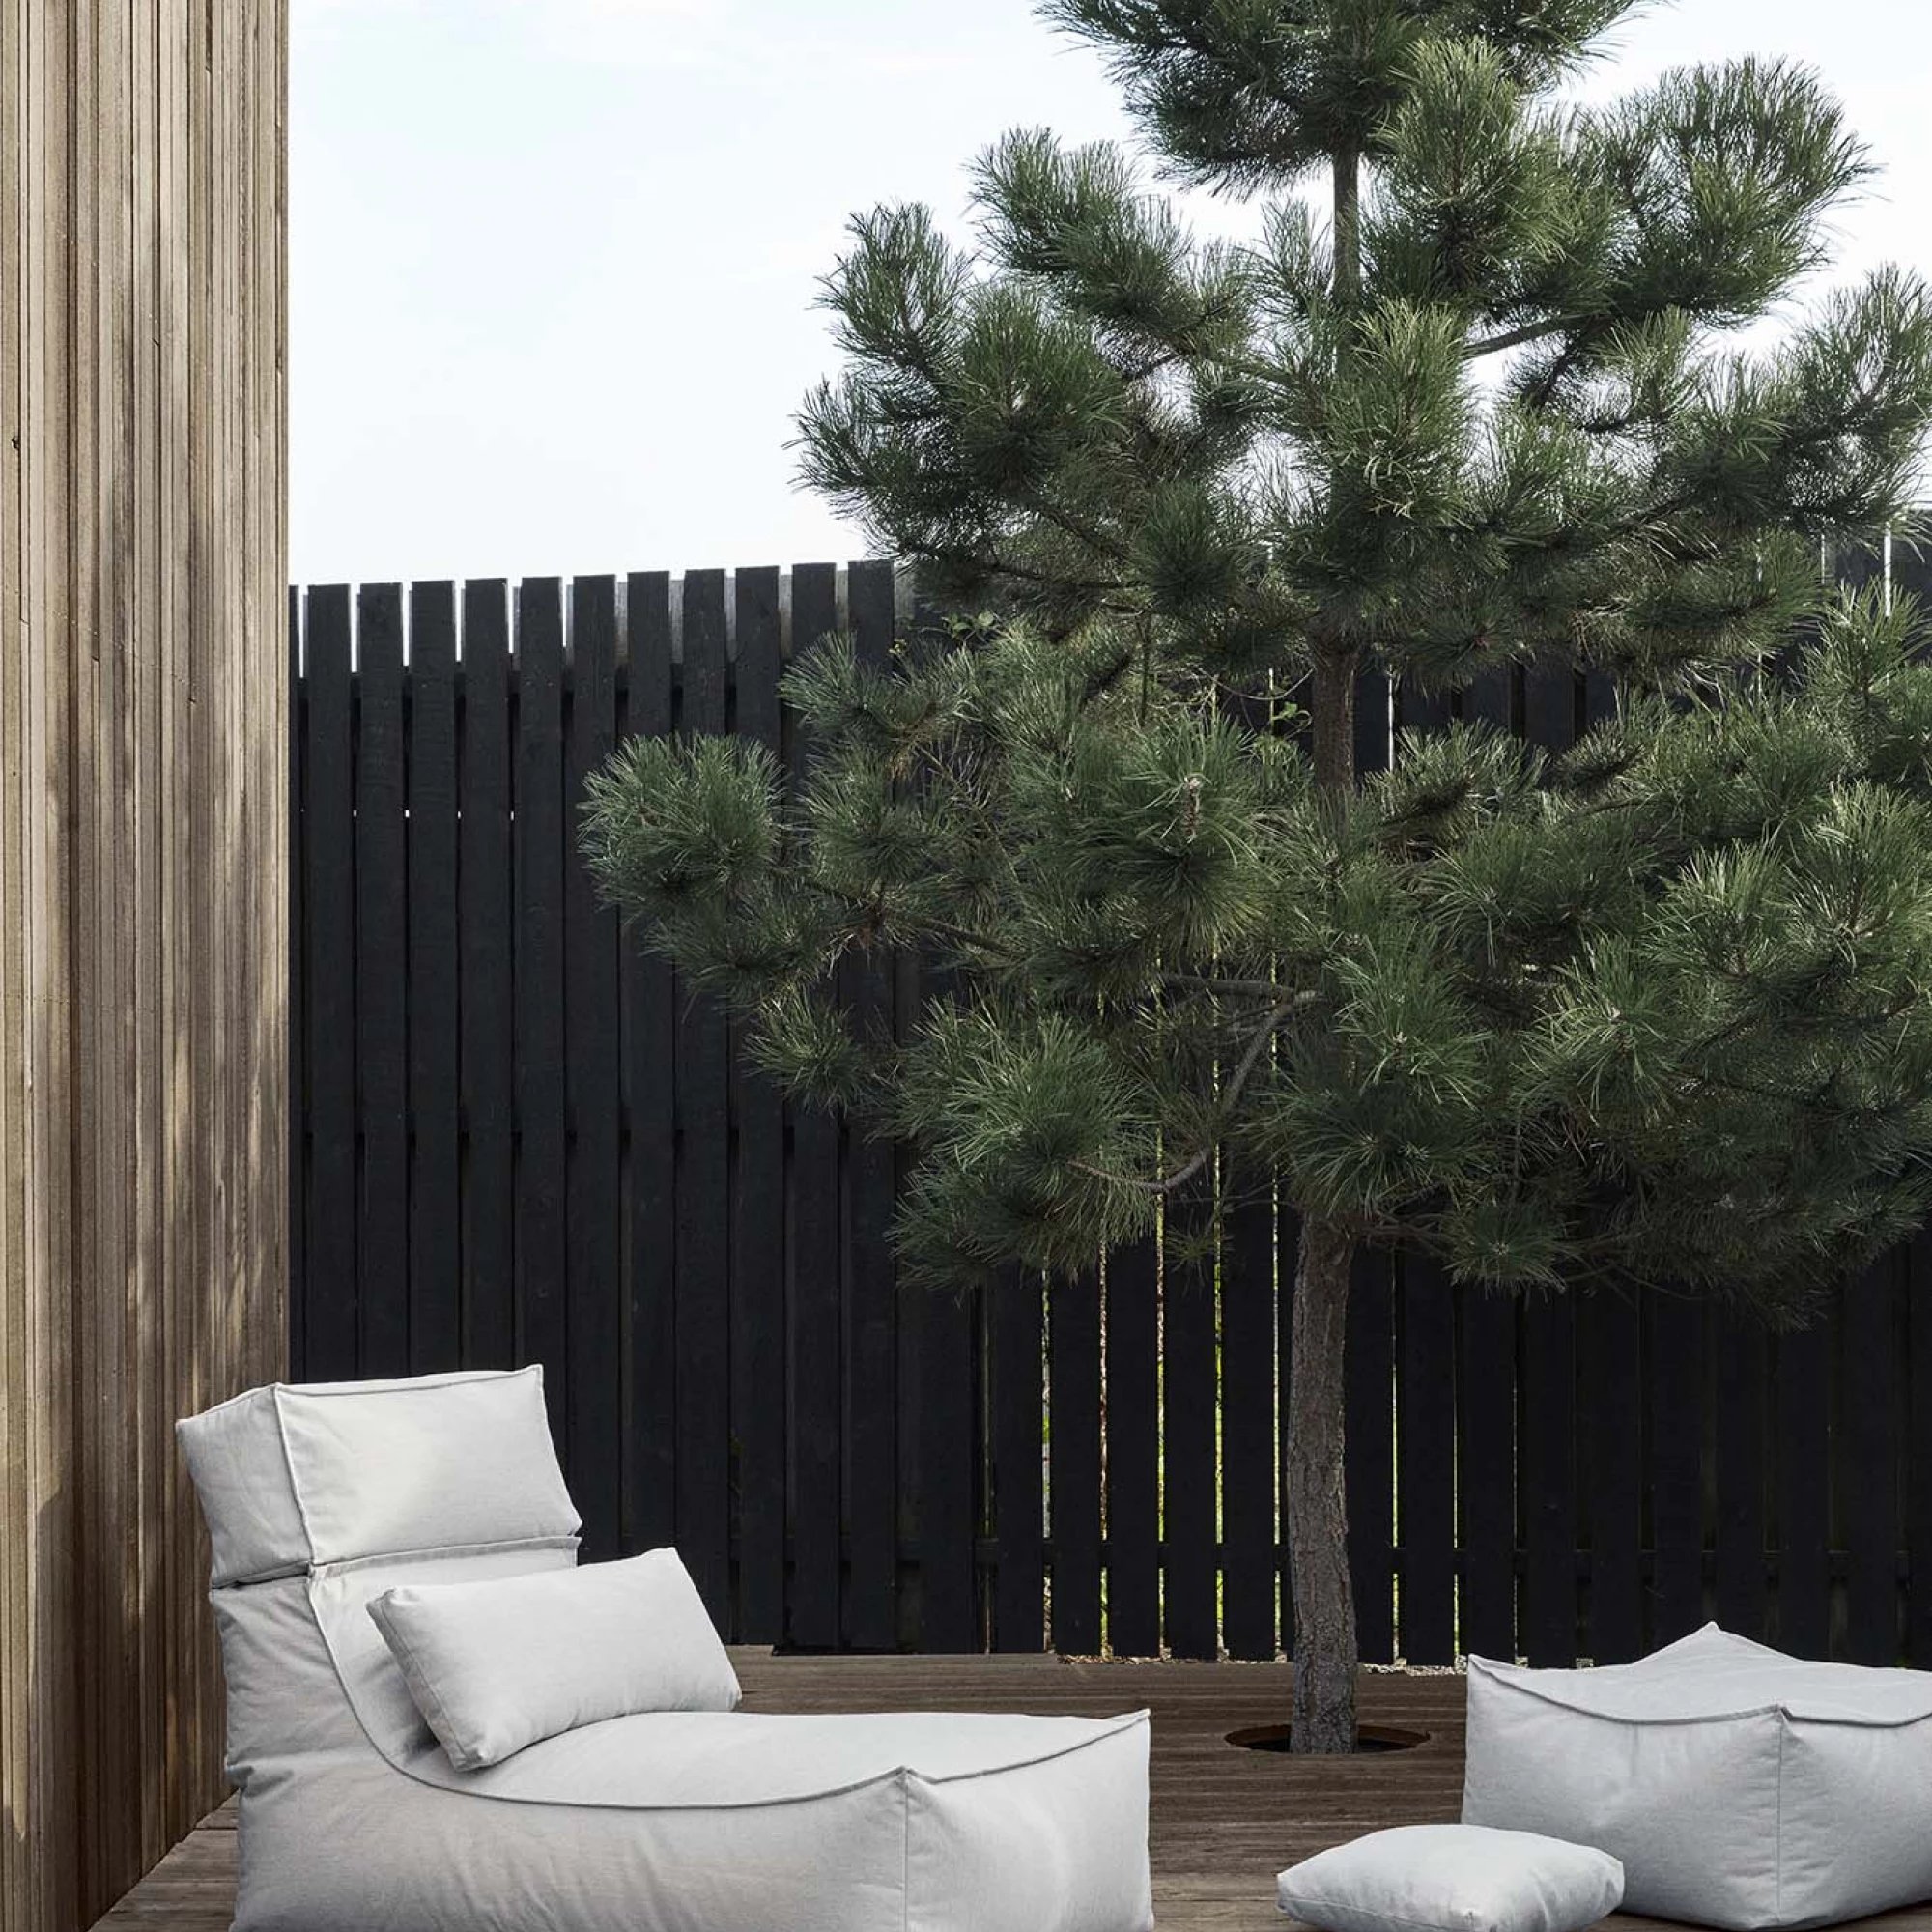 BLOMUS // STAY - OUTDOOR LOUNGER | COAL